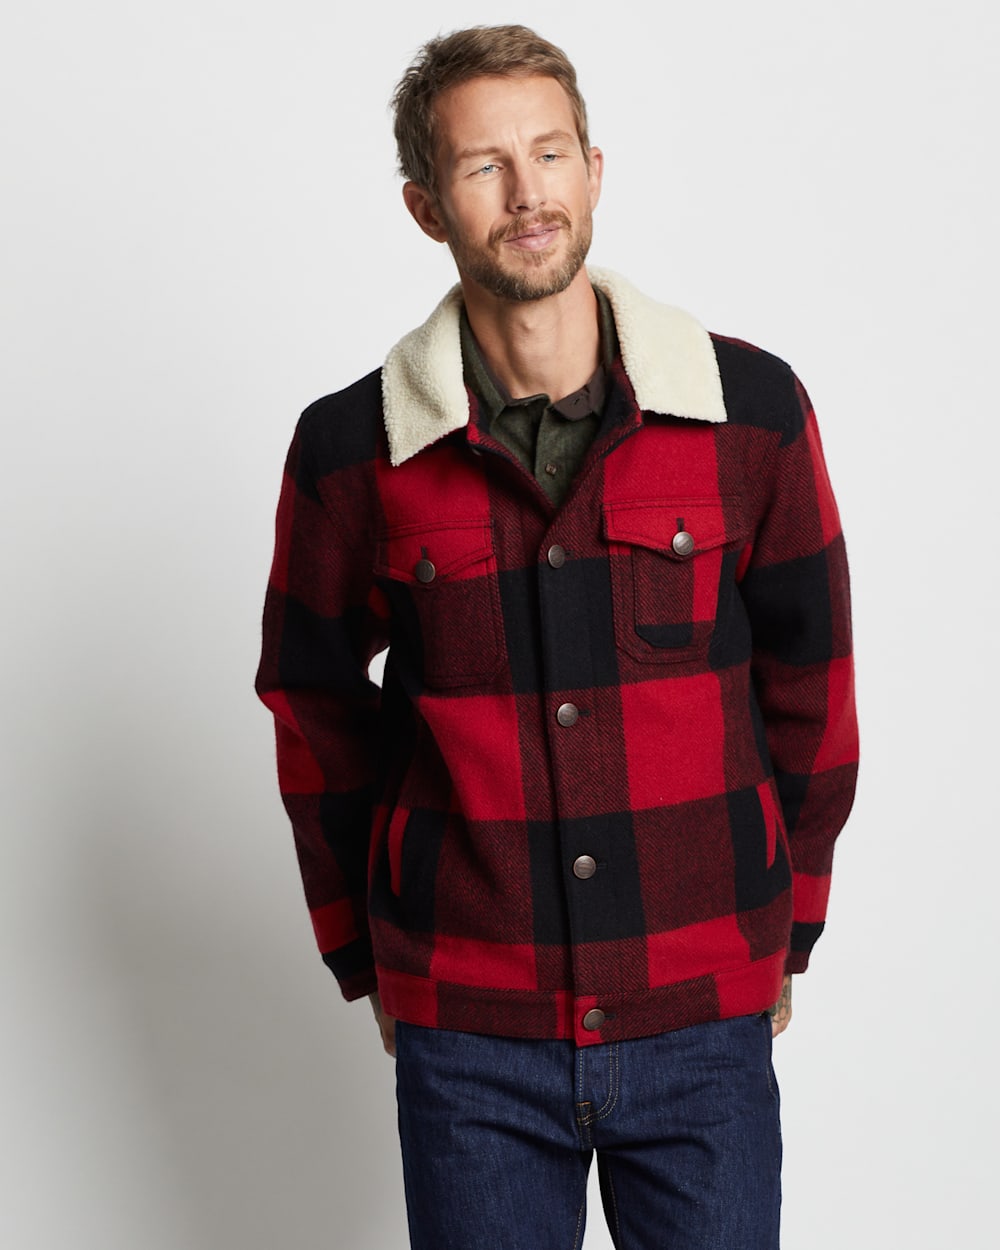 ALTERNATE VIEW OF MEN'S WOOL STADIUM CLOTH PLAID TRUCKER COAT IN RED/BLACK BUFFALO CHECK image number 2